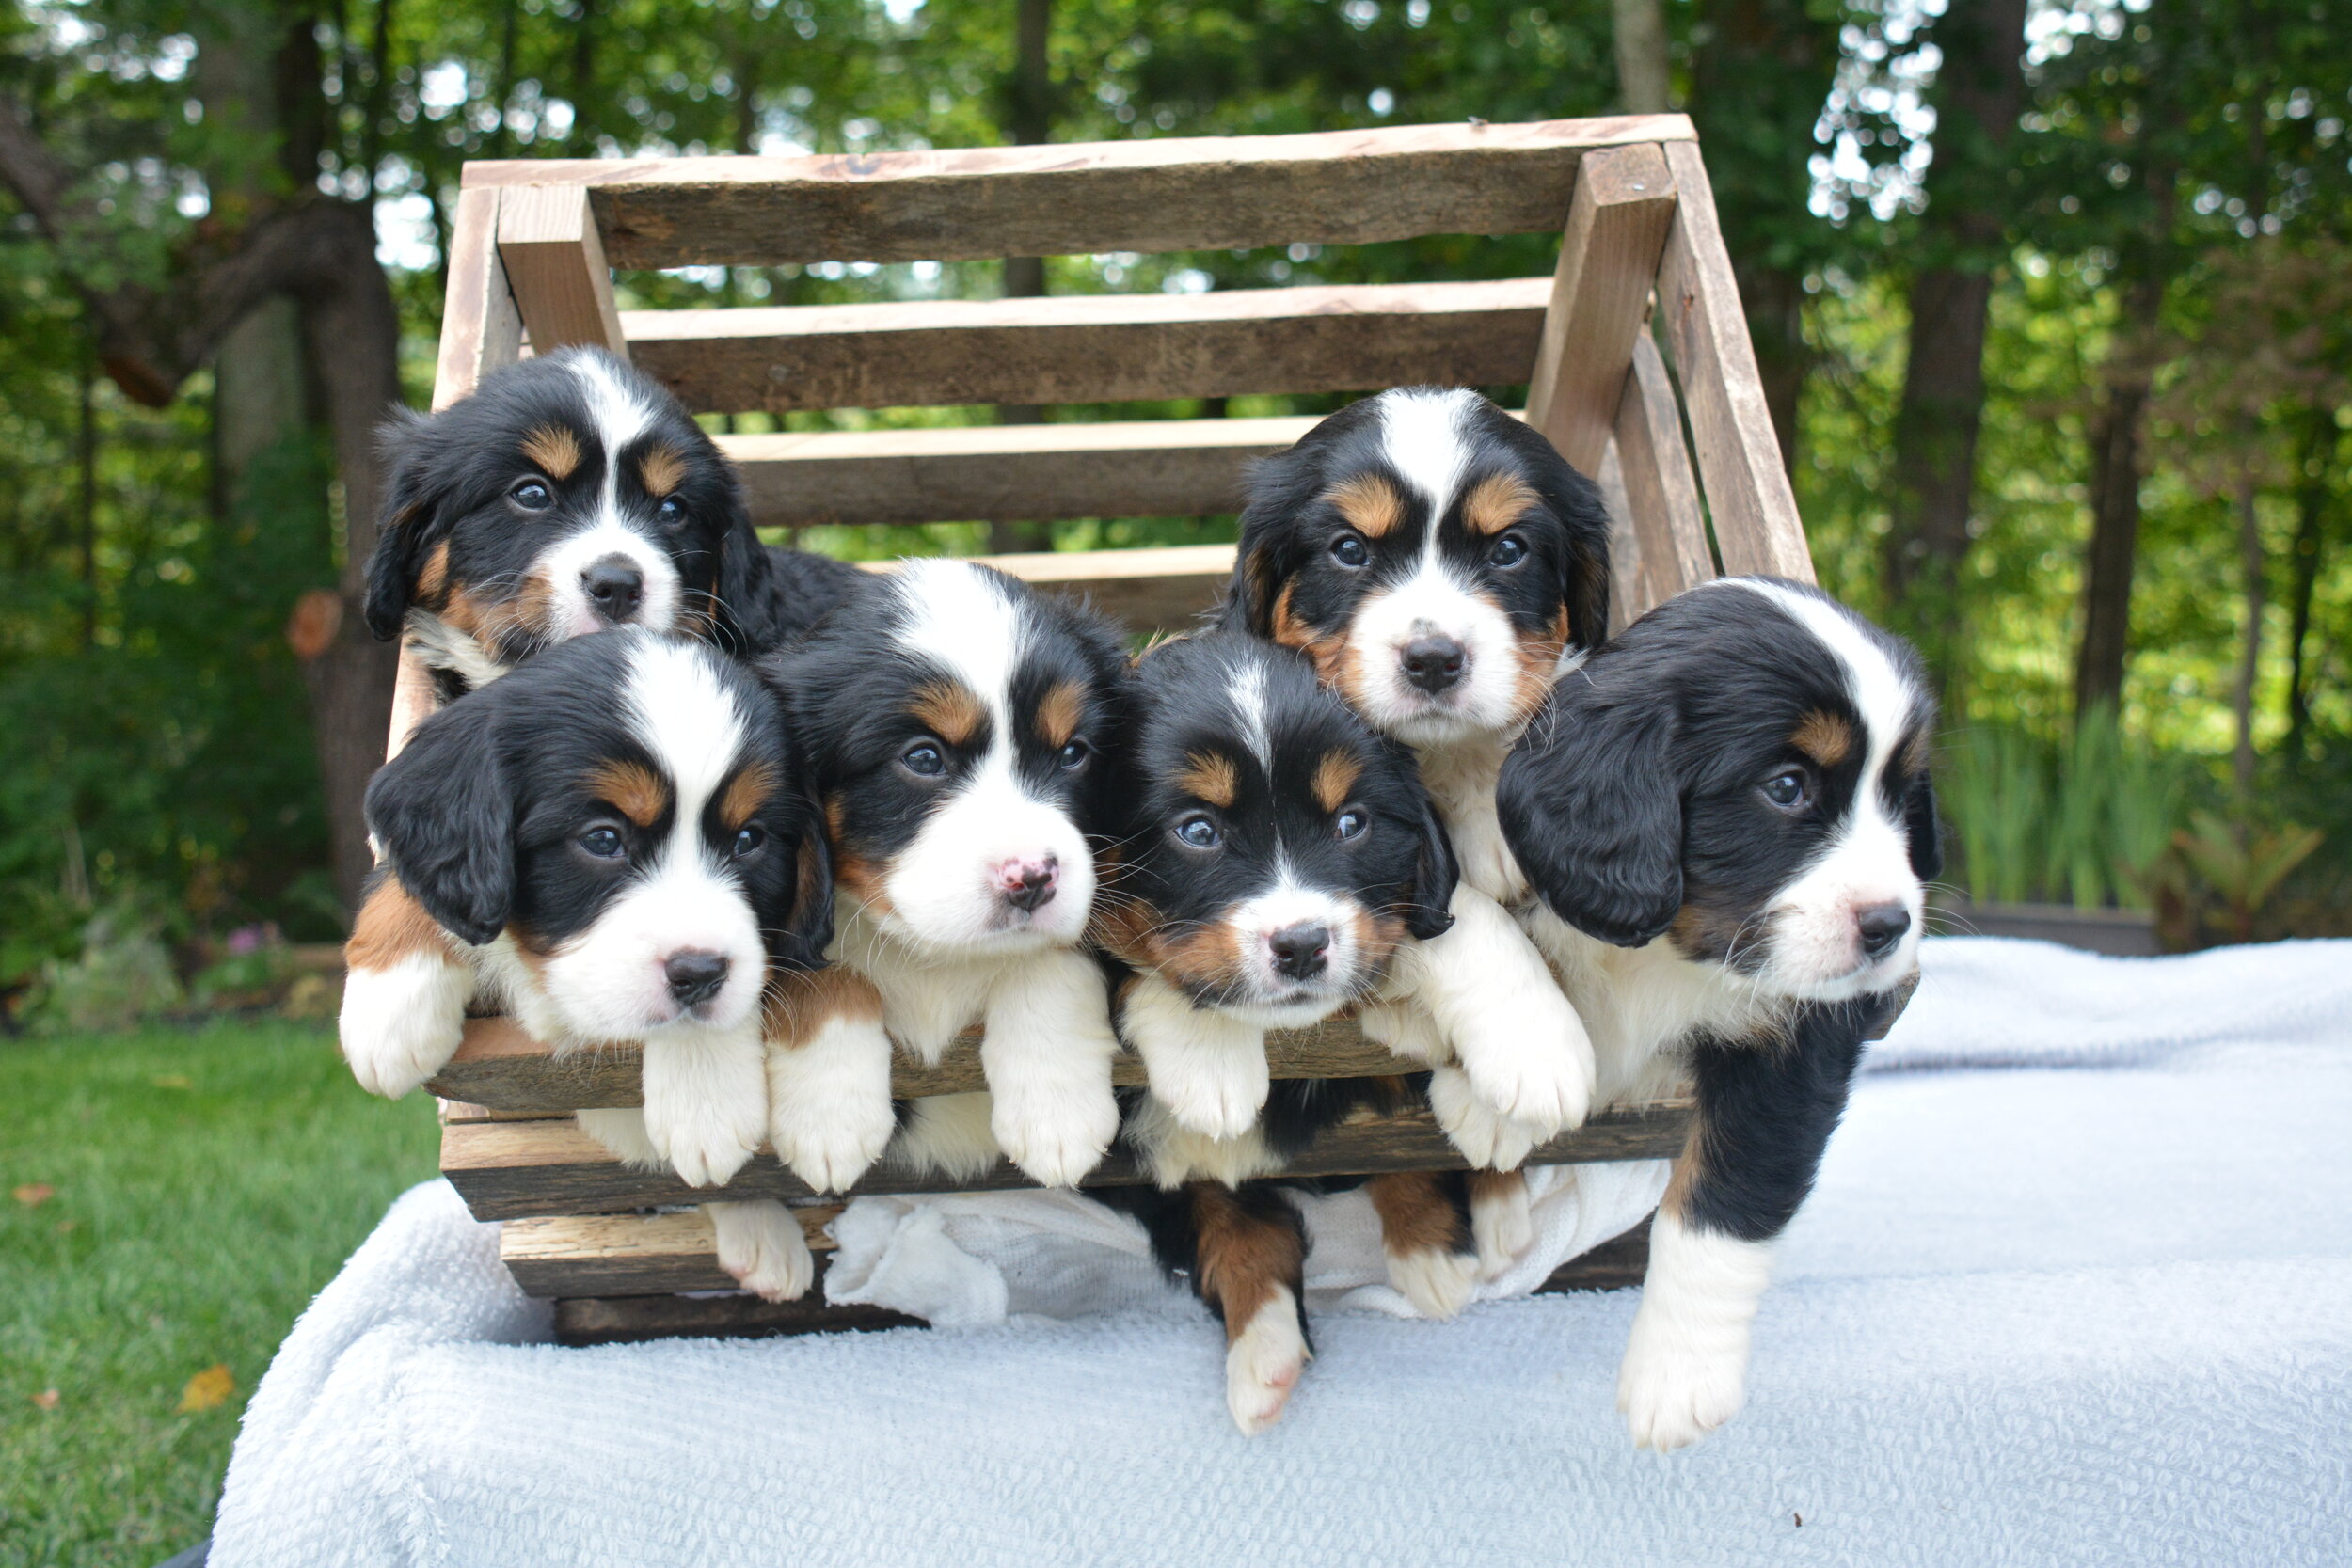 14 Questions You Should Ask Bernese Mountain Dog Breeders - The Paws